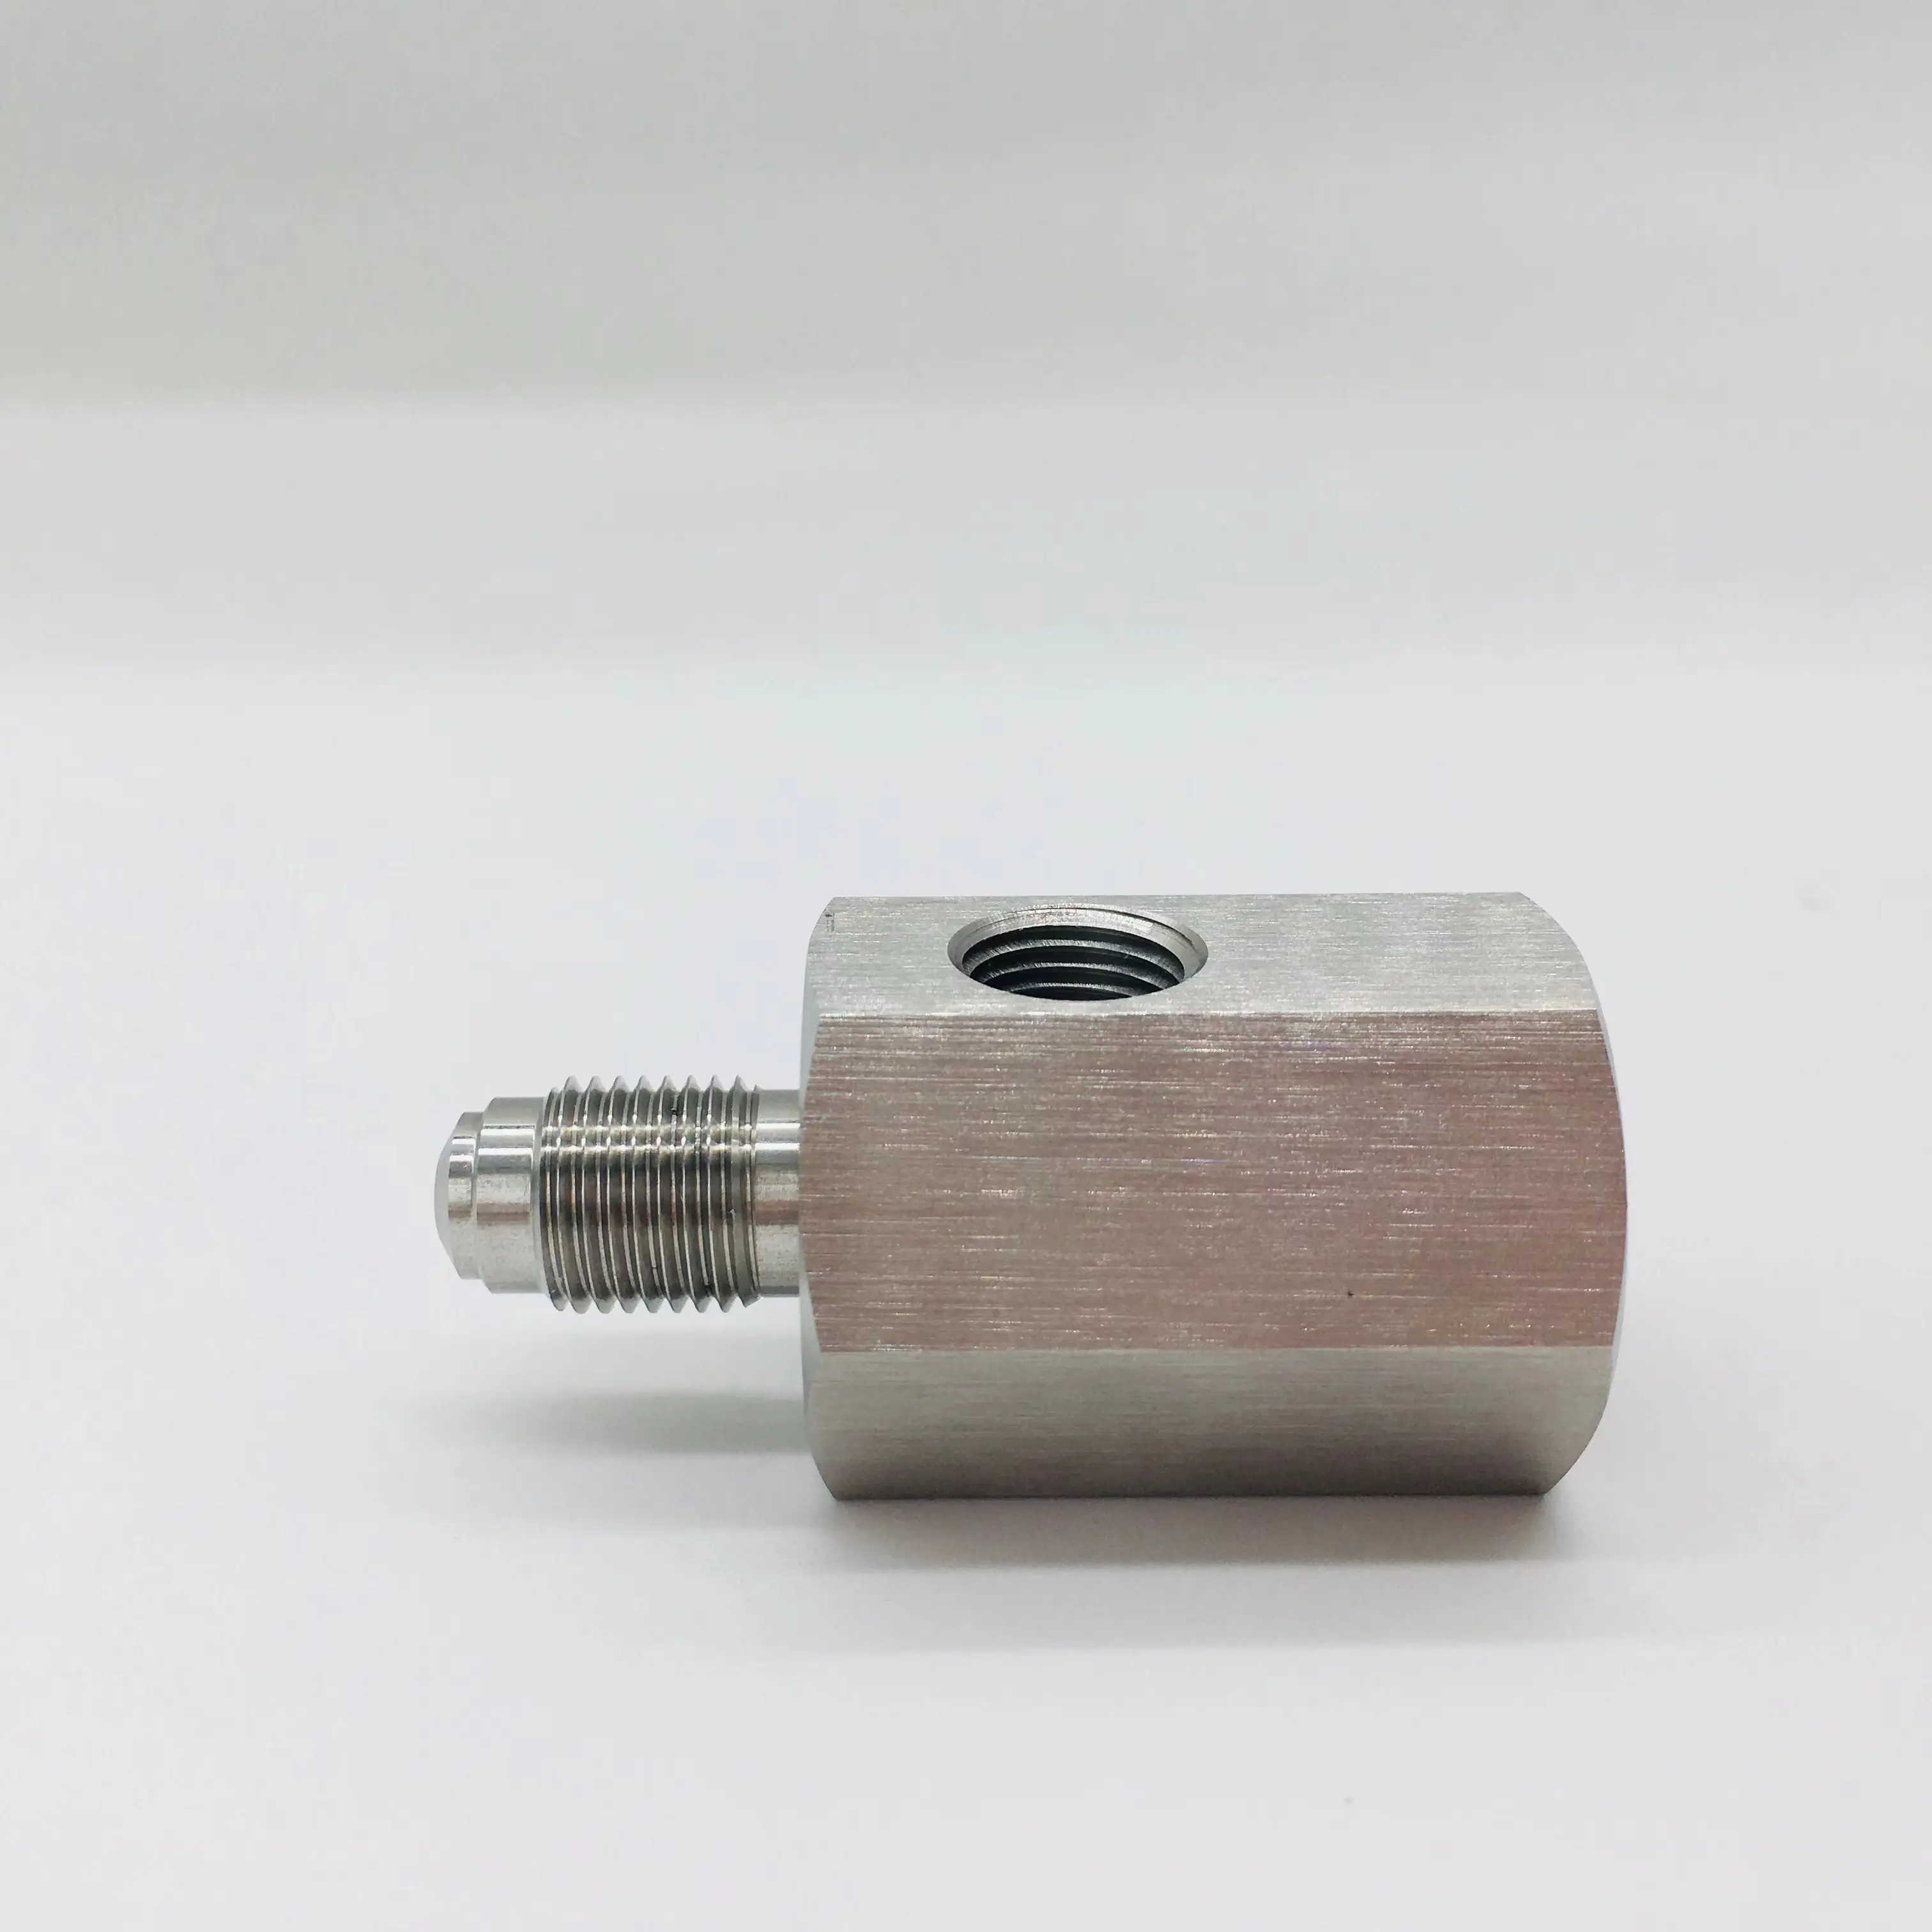 Cnc Machining 3D Printer Part Stainless Steel Bushing Accessories Cnc Enterprise Lathe Parts With Anodizing Service Bering